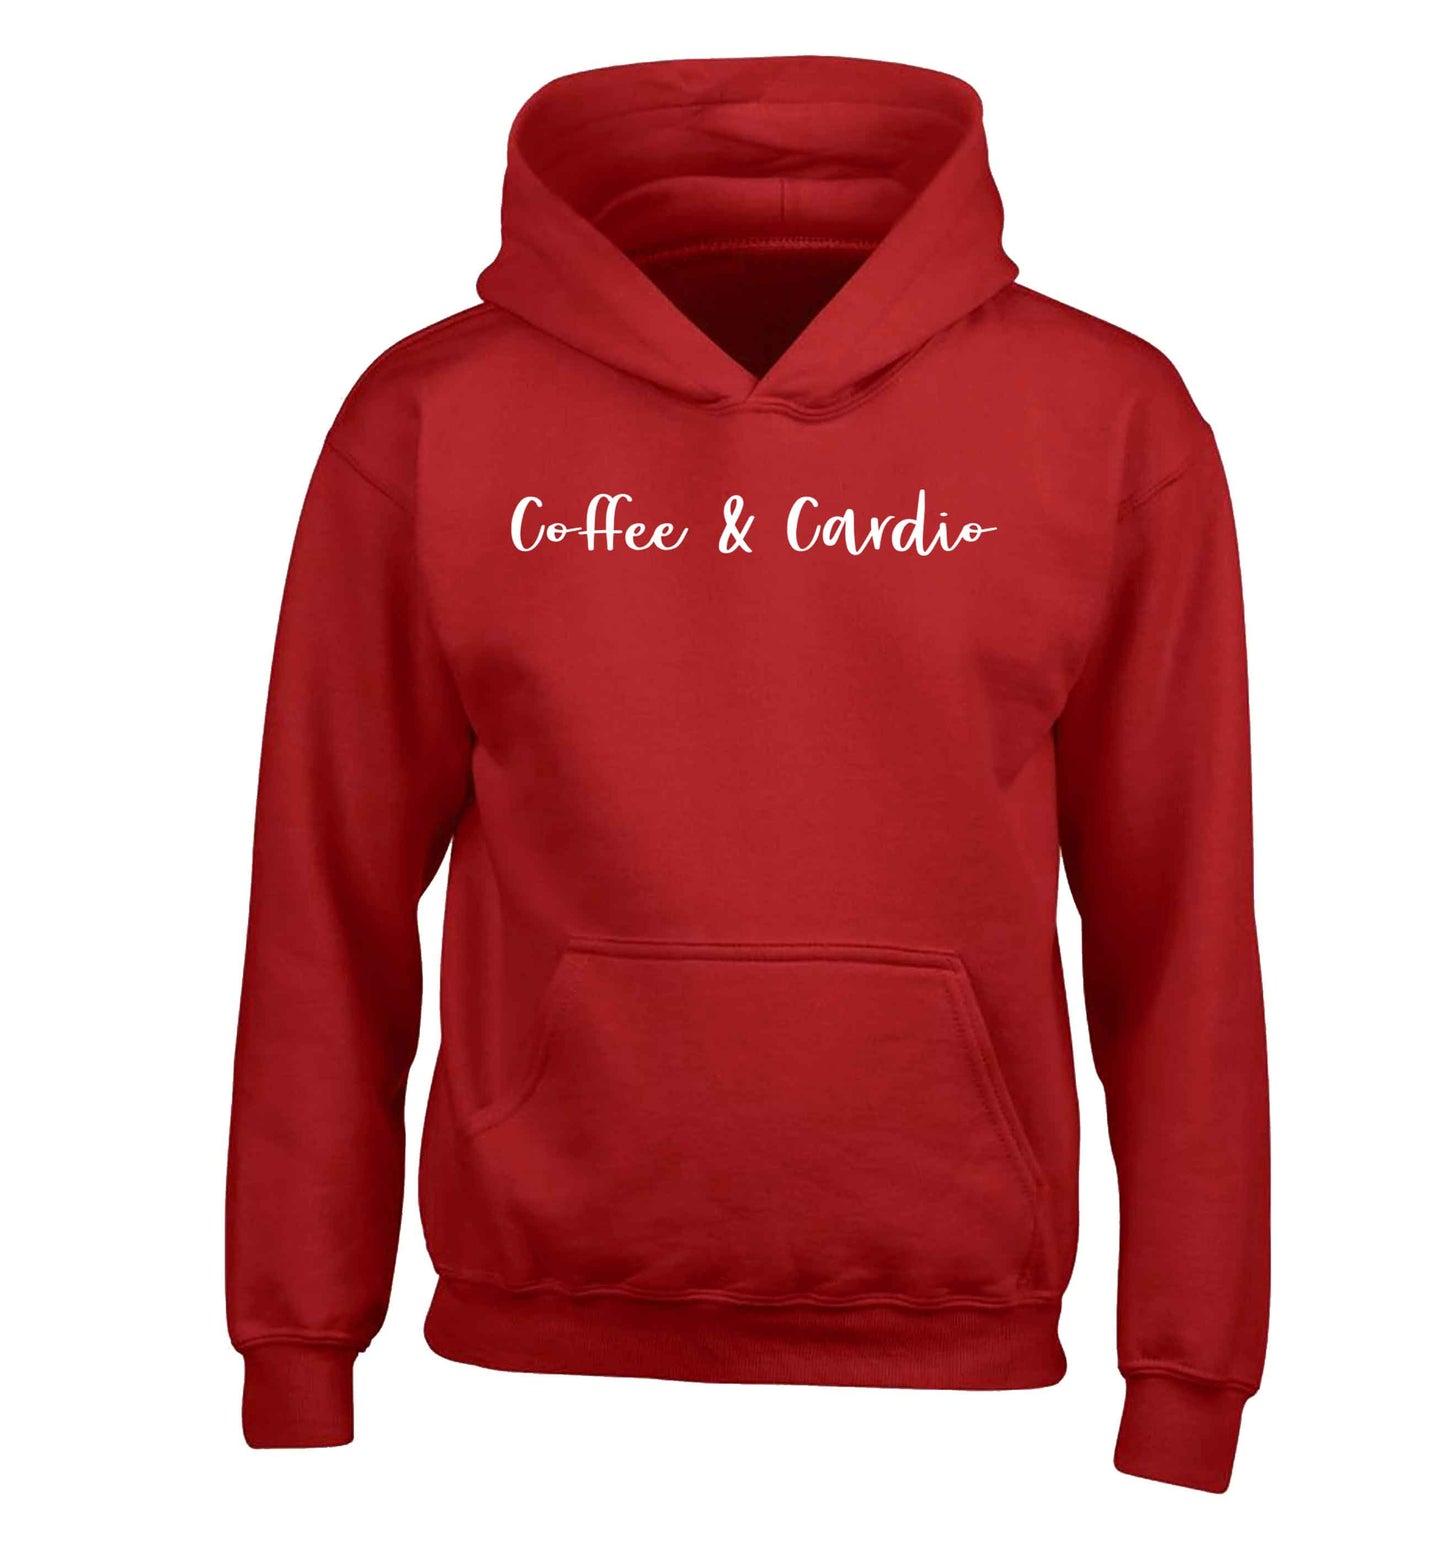 Coffee and cardio children's red hoodie 12-13 Years